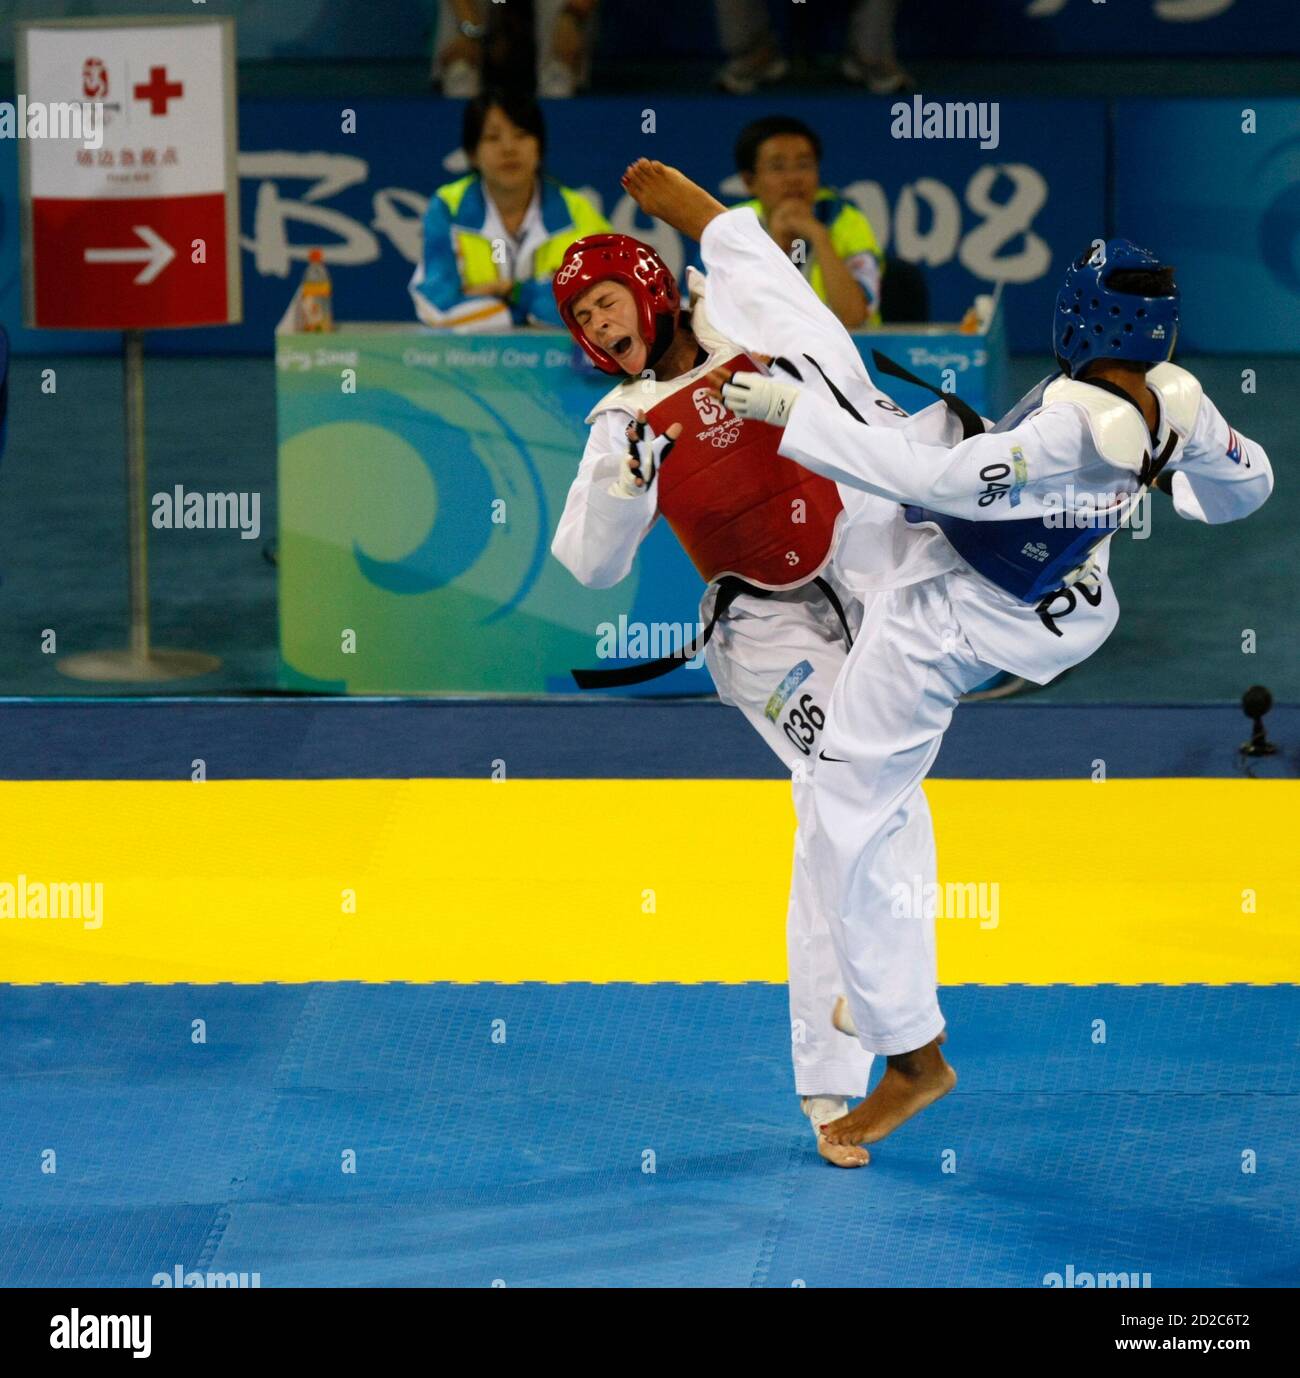 Asuncion Ocasio Rodriguez of Puerto Rico fights Sandra Saric (red) of  Croatia during the women's -67kg bronze medal taekwondo competition at the  Beijing 2008 Olympic Games, August 22, 2008. REUTERS/Issei Kato (CHINA